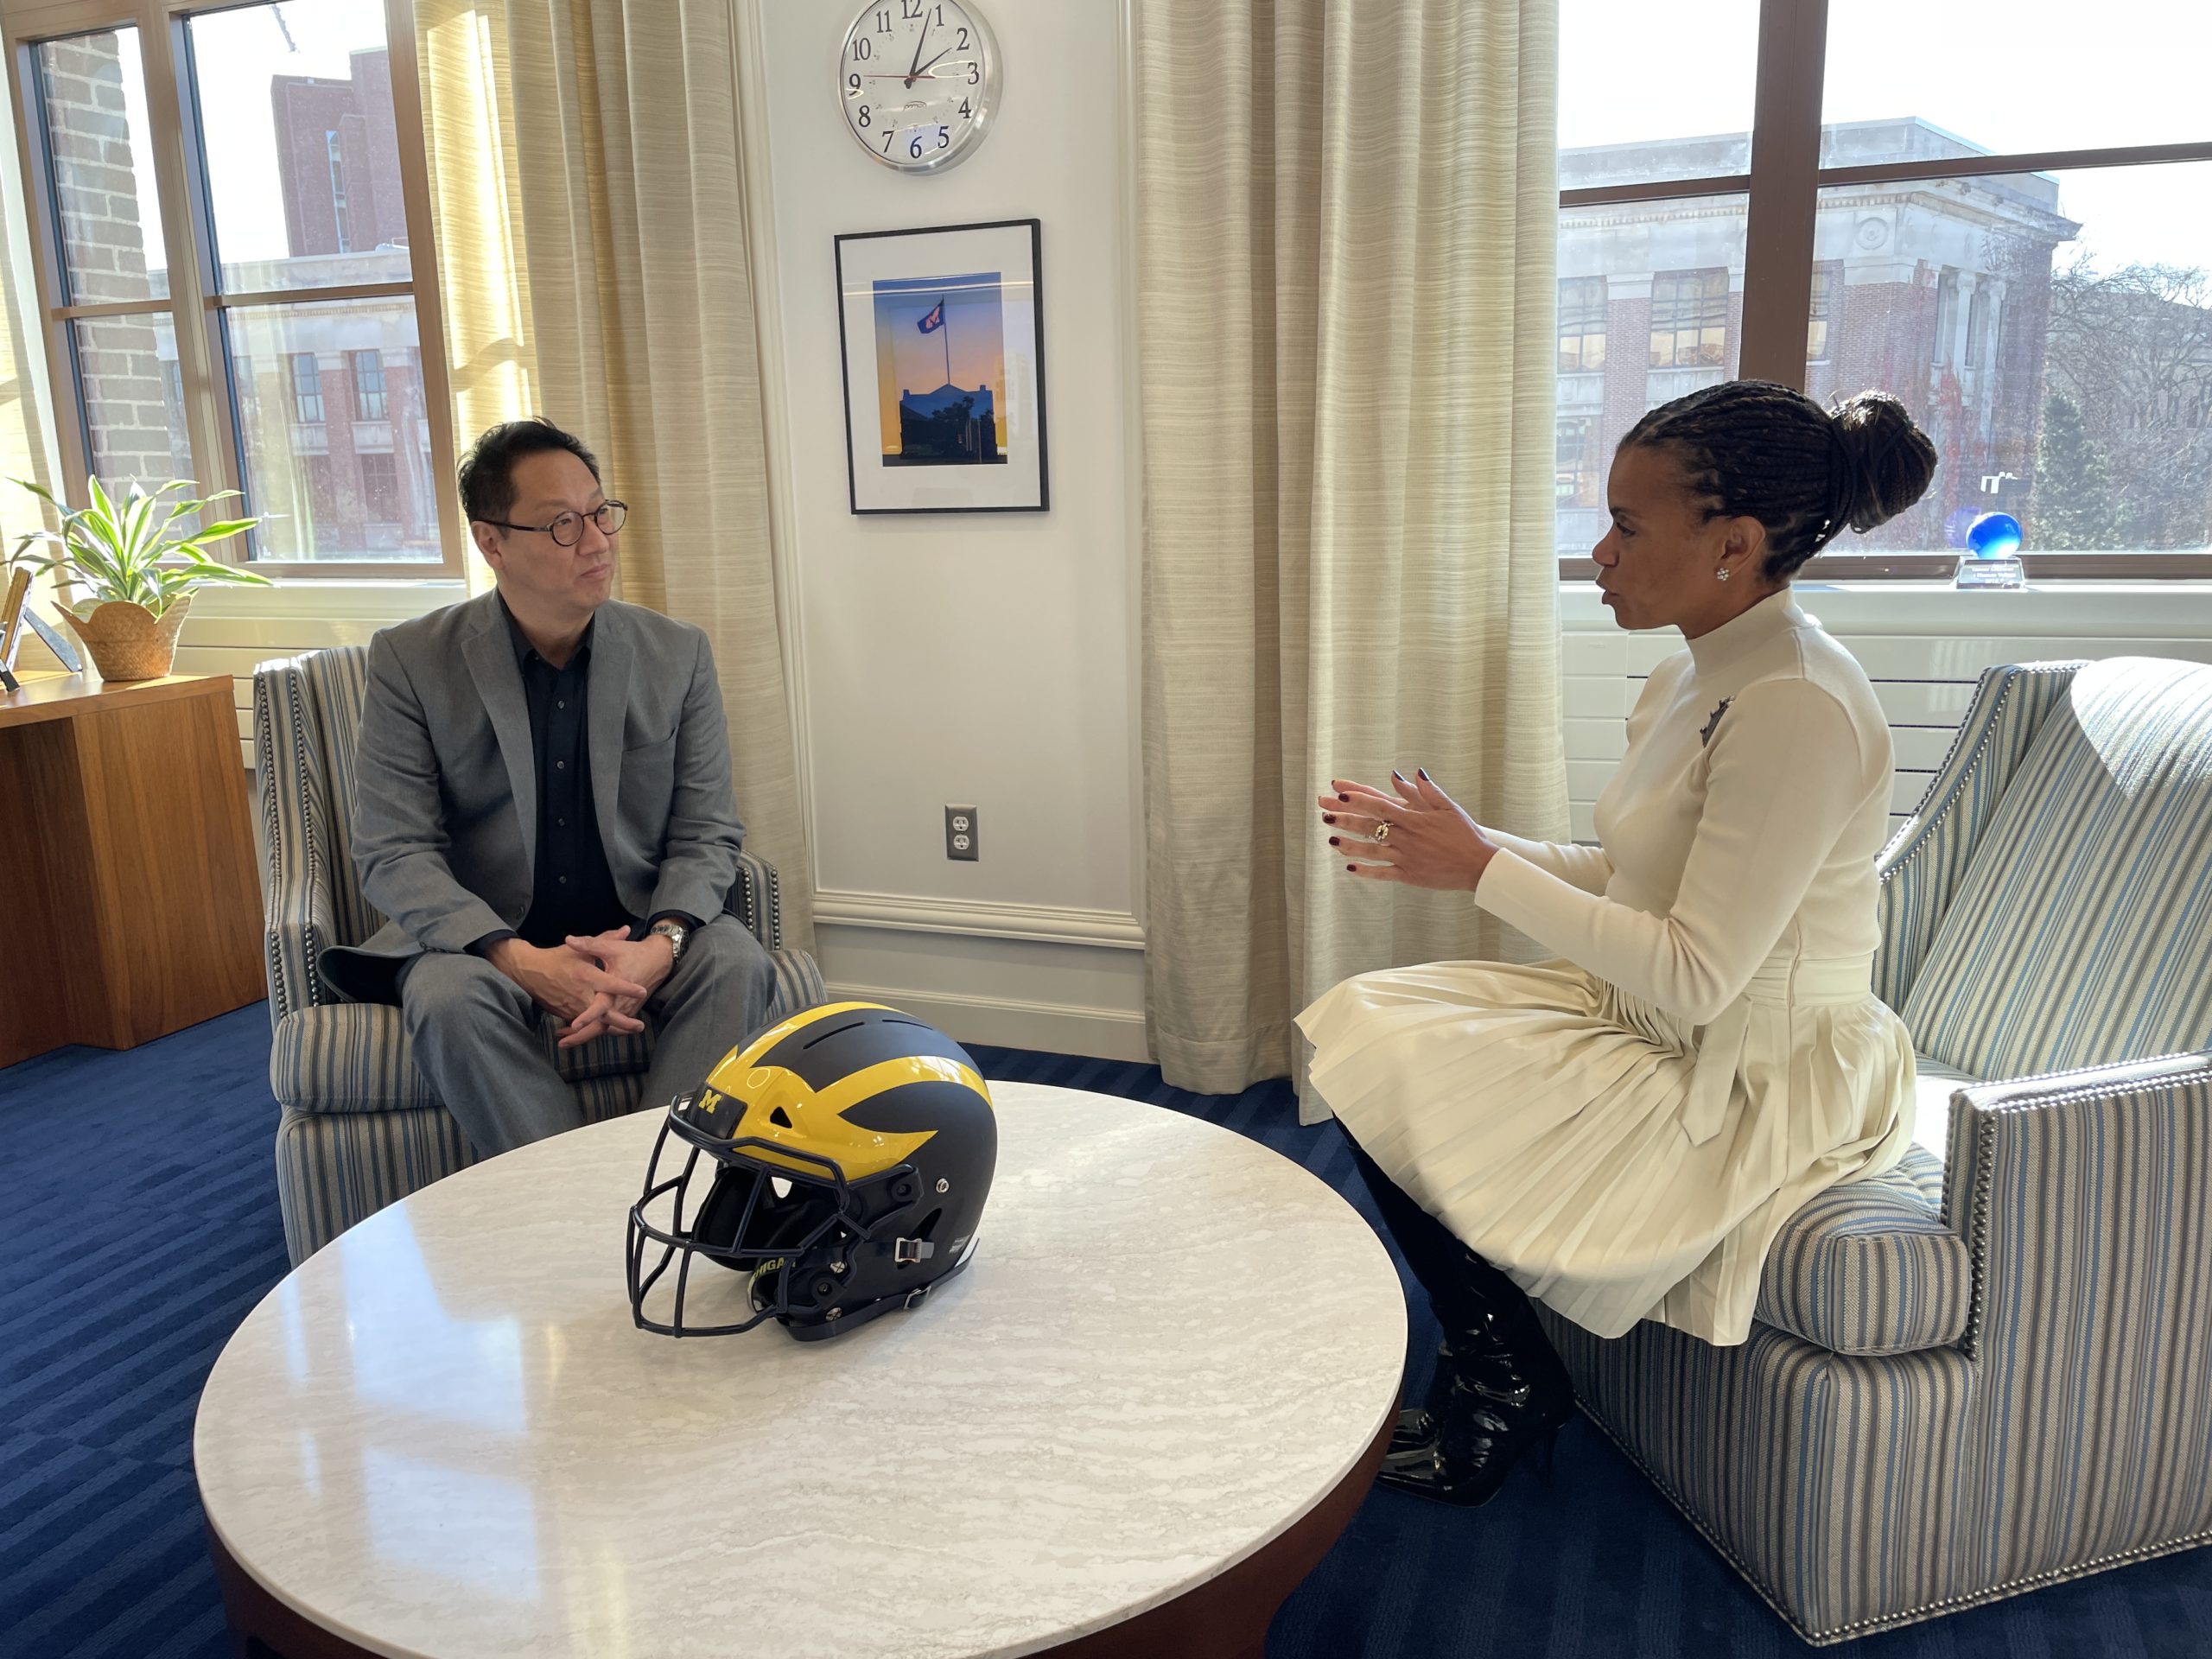 Corie Pauling sits in an open office space with U-M President Santa Ono. Ono is wearing a grey suit and Corie is wearing a white, long-sleeve dress. They are sitting in arm chairs with a round table between them.